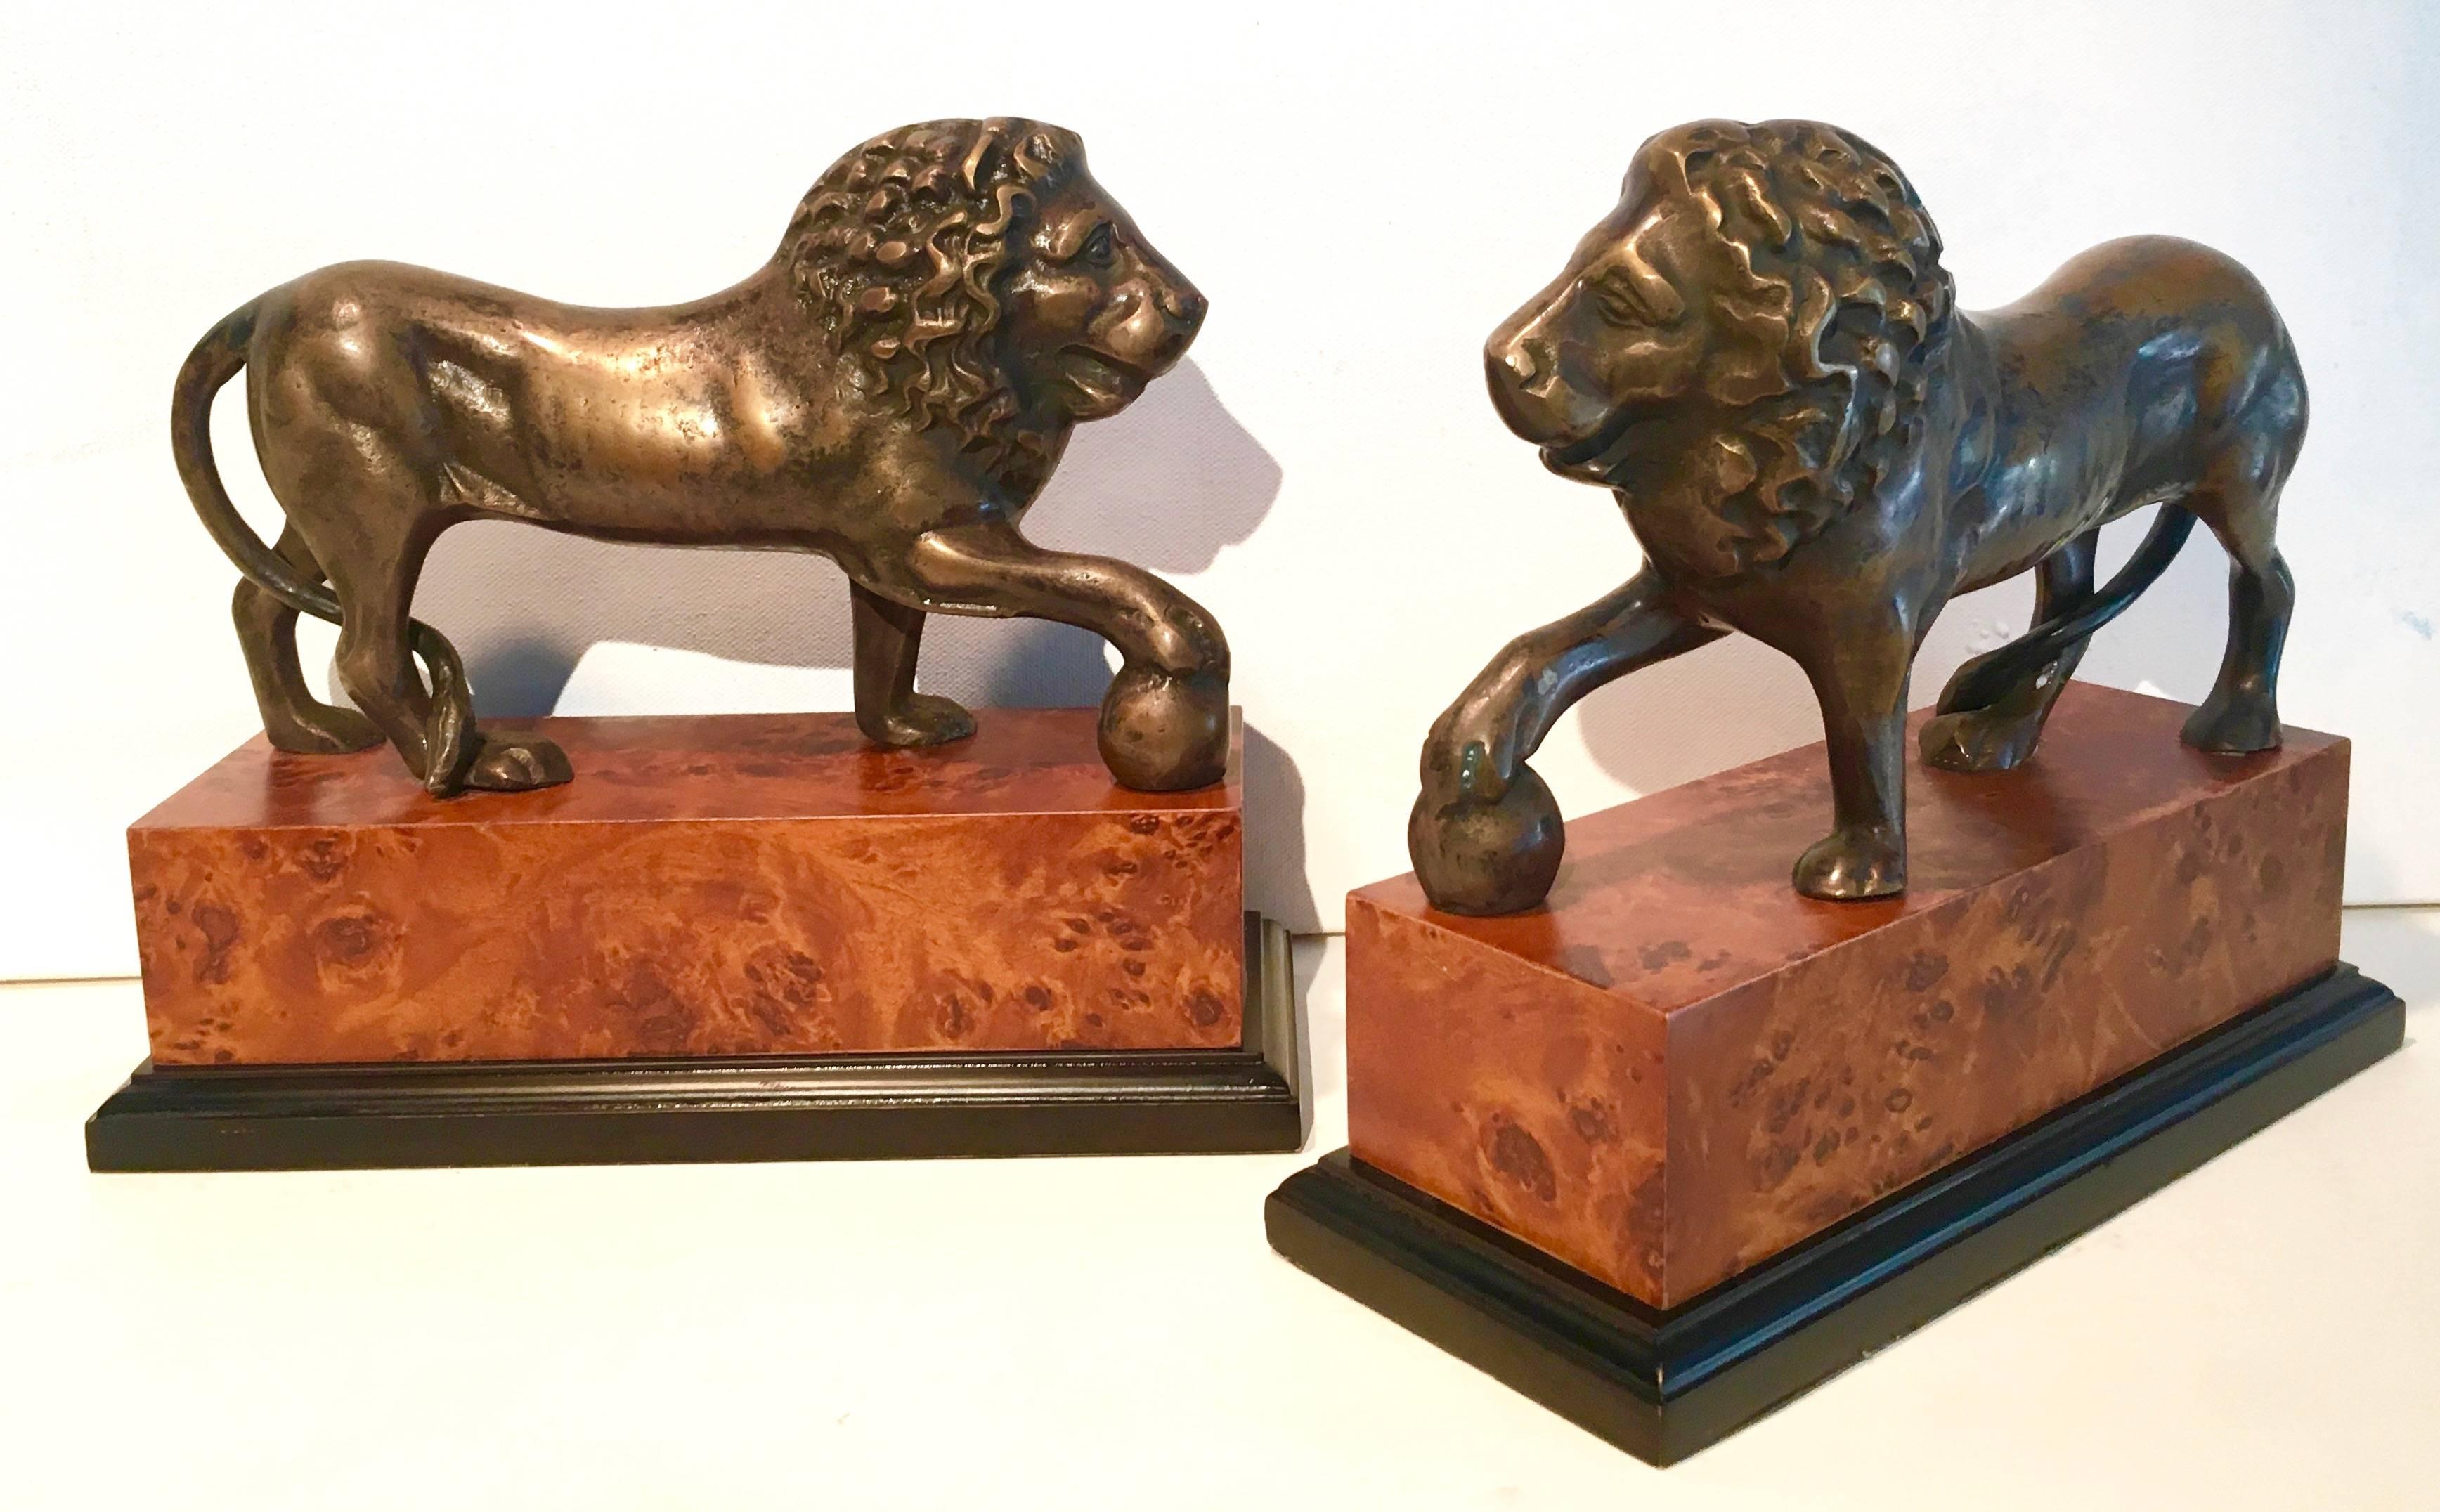 Pair of brass lions on a burl wooden base. The pair are quite large and will make an impression on any shelf! The pair will hold larger books great for the den, library or child's room!